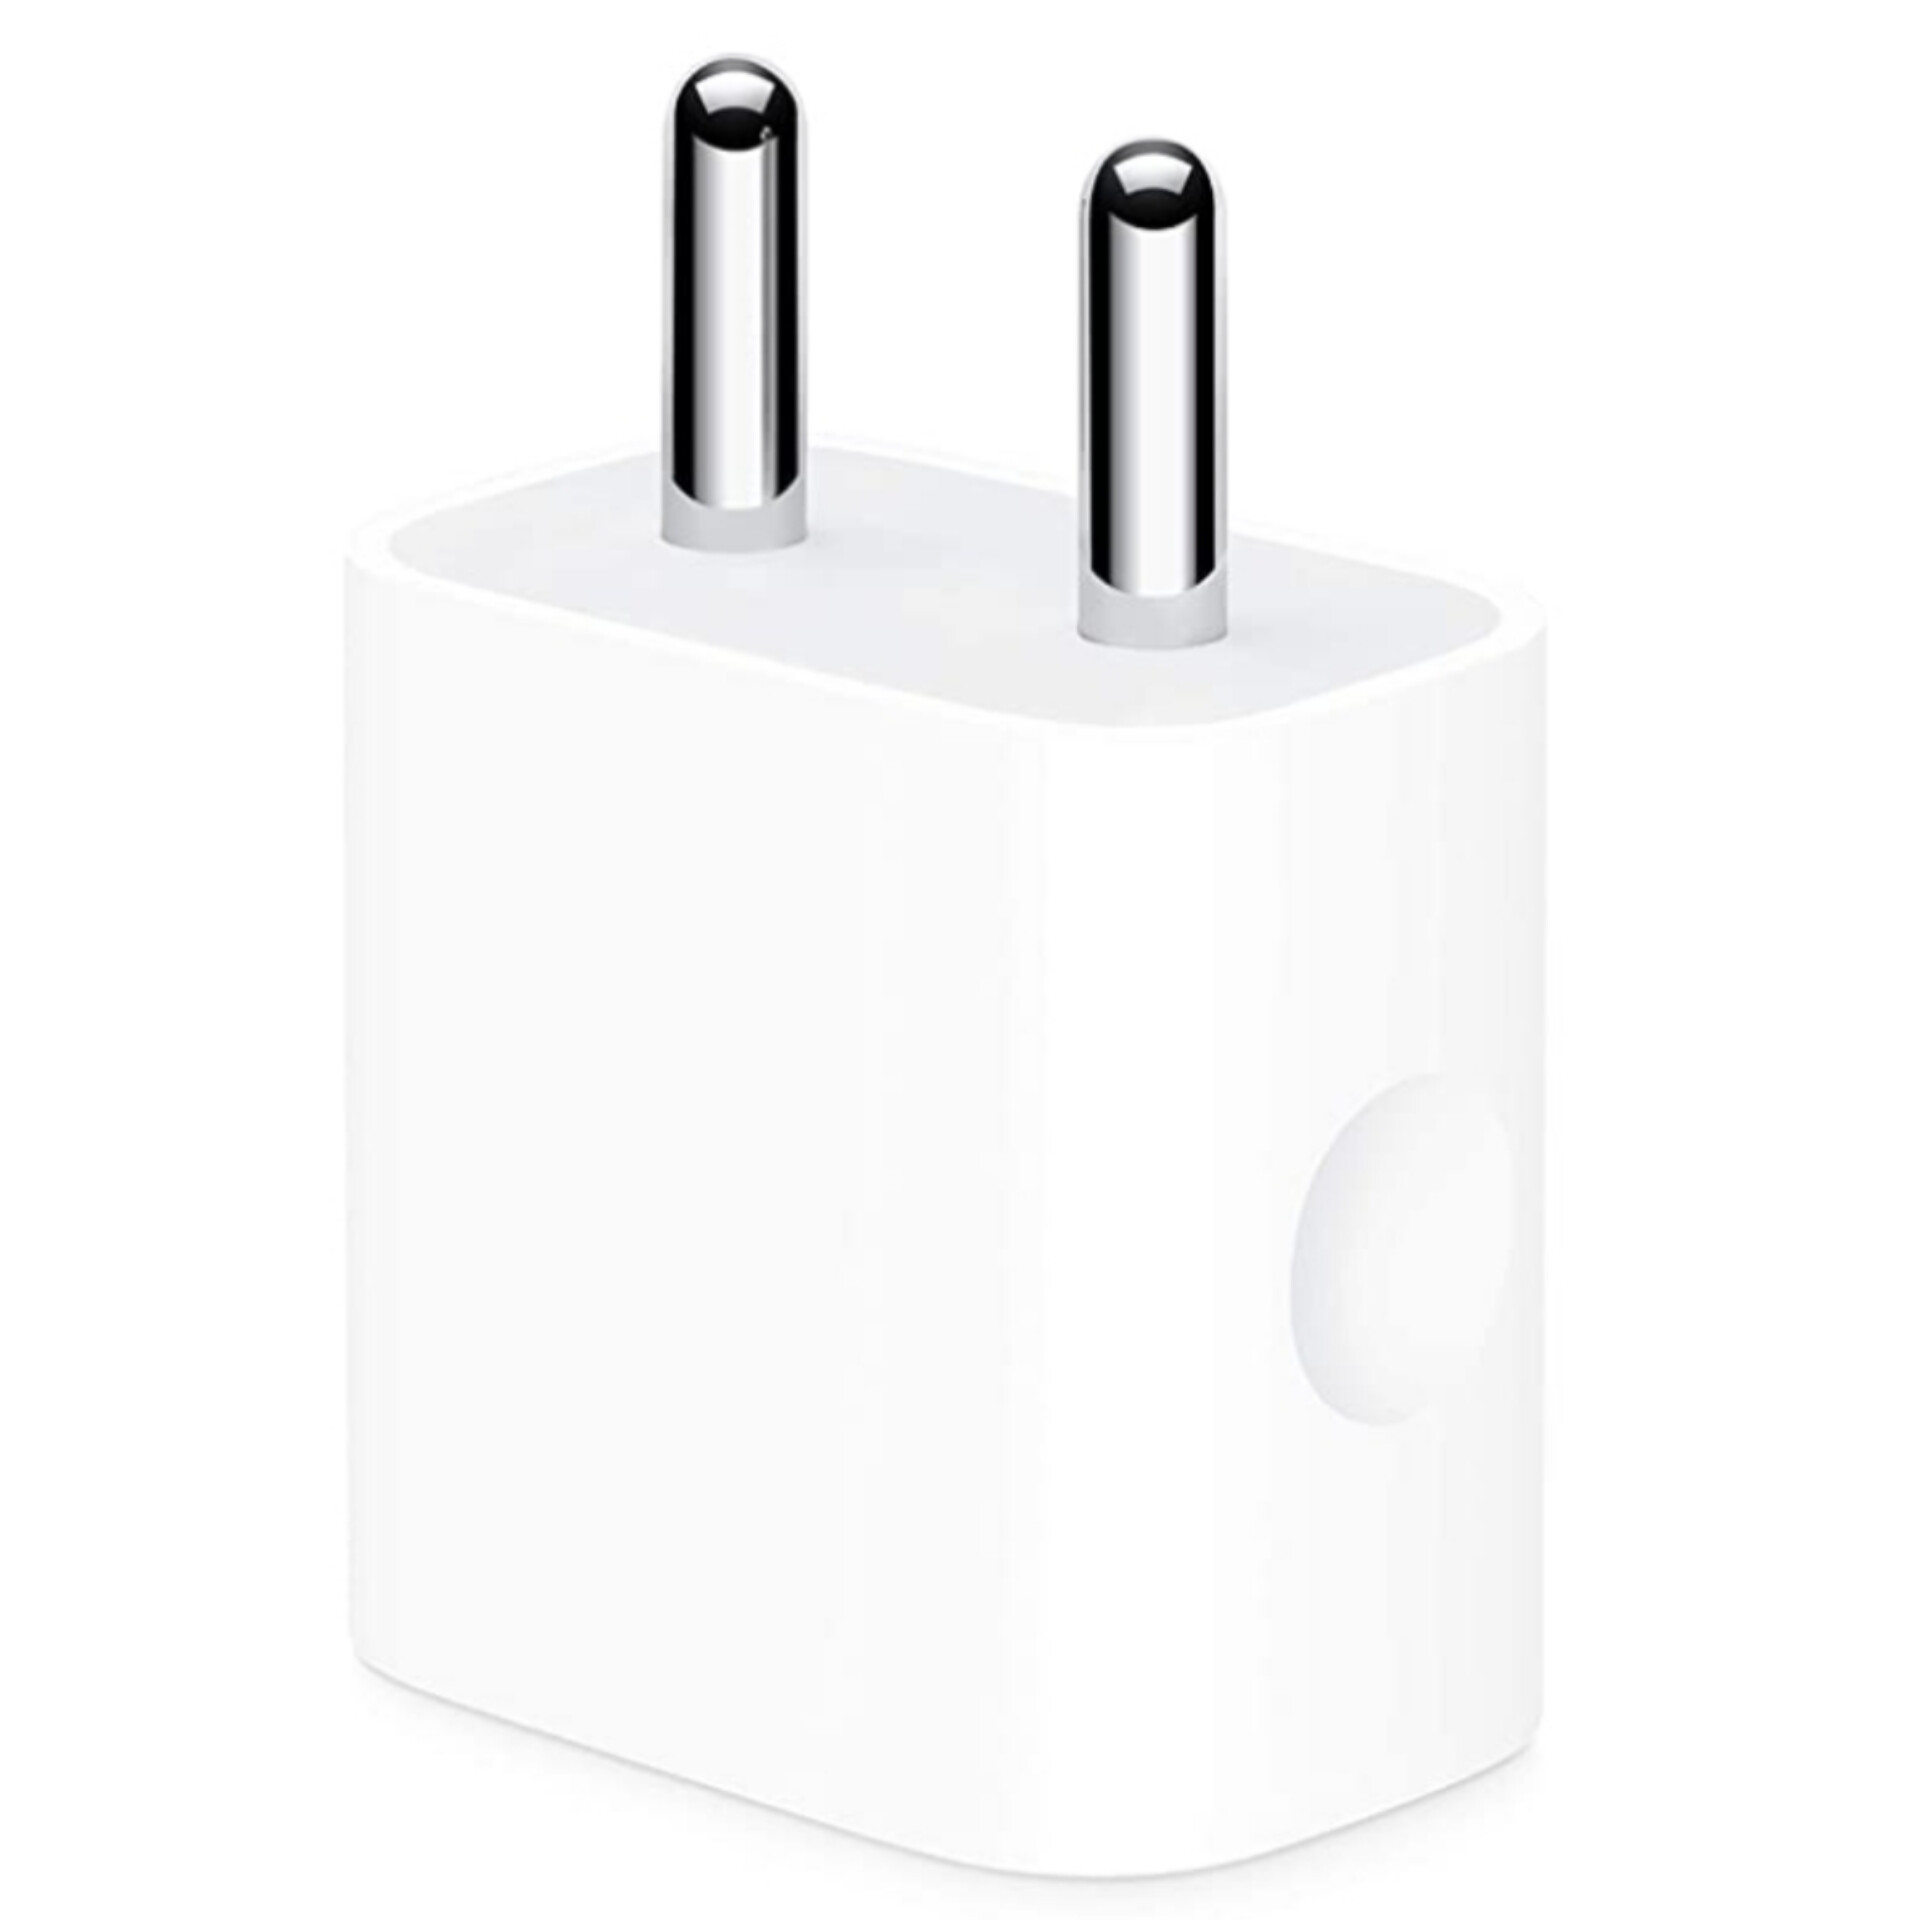 Apple 20W USB-C Power Benefits Adapter & Exchange: with AirPods) iPhone, – iPad Recycle (for